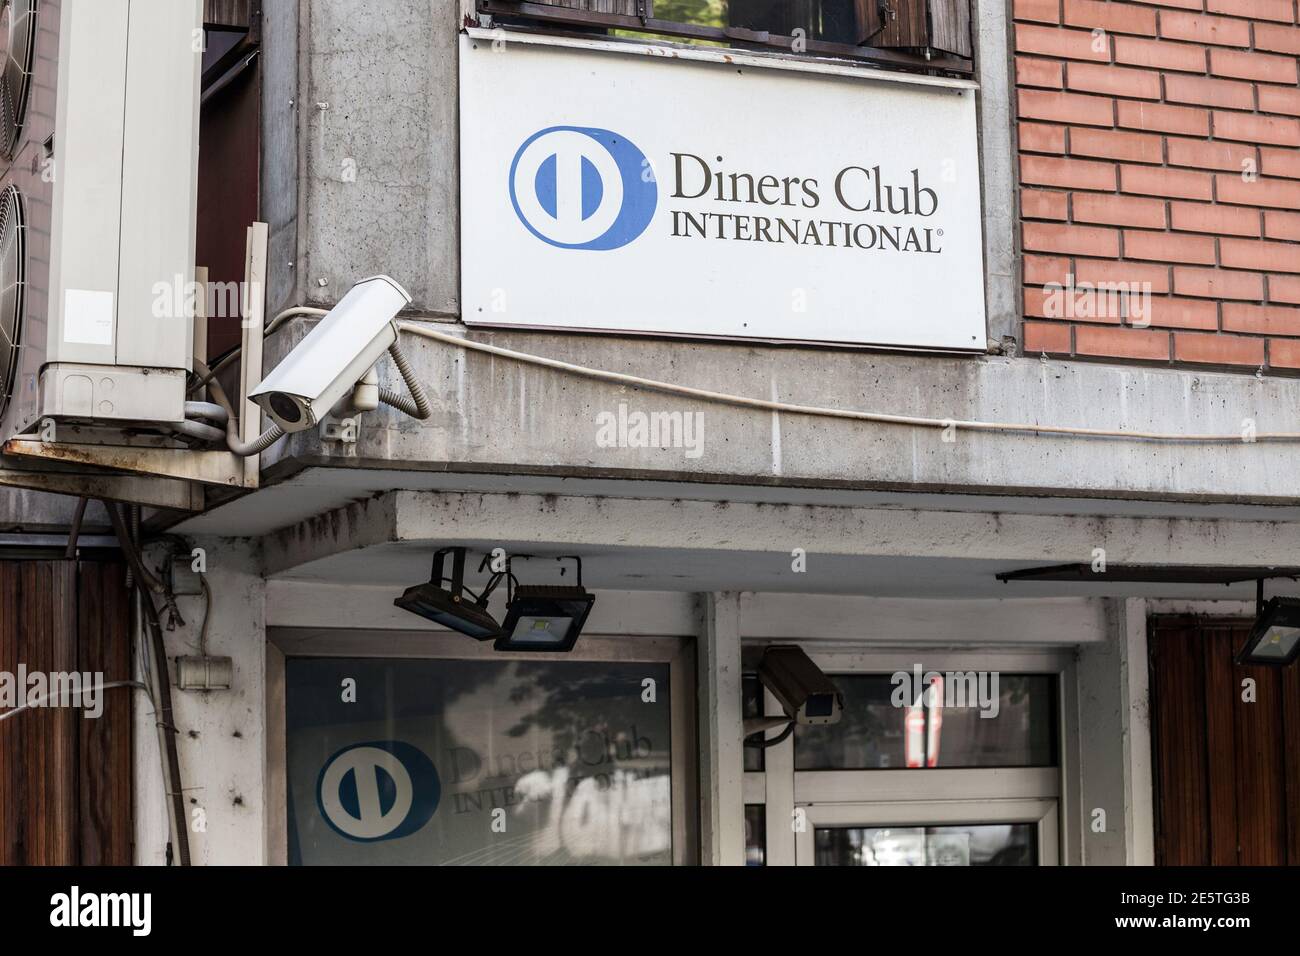 BELGRADE, SERBIA - JUNE 8, 2019: Diners club international logo in front of their office for Serbia. Diners club is a charge card and credit card comp Stock Photo